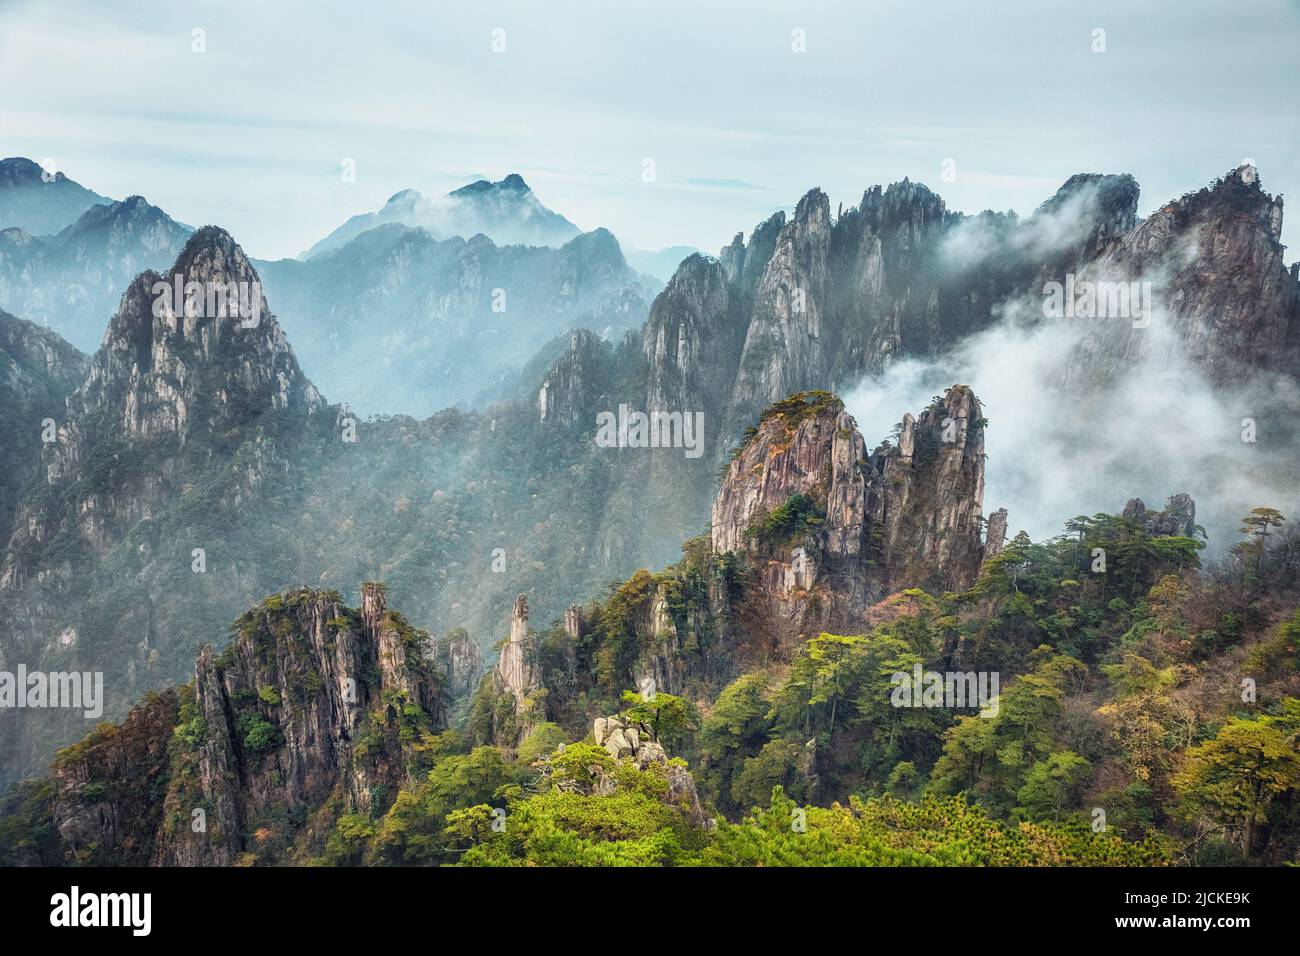 view from Refreshing terrace in Huangshan mountain, known as Yellow mountain, Anhui, China. Stock Photo